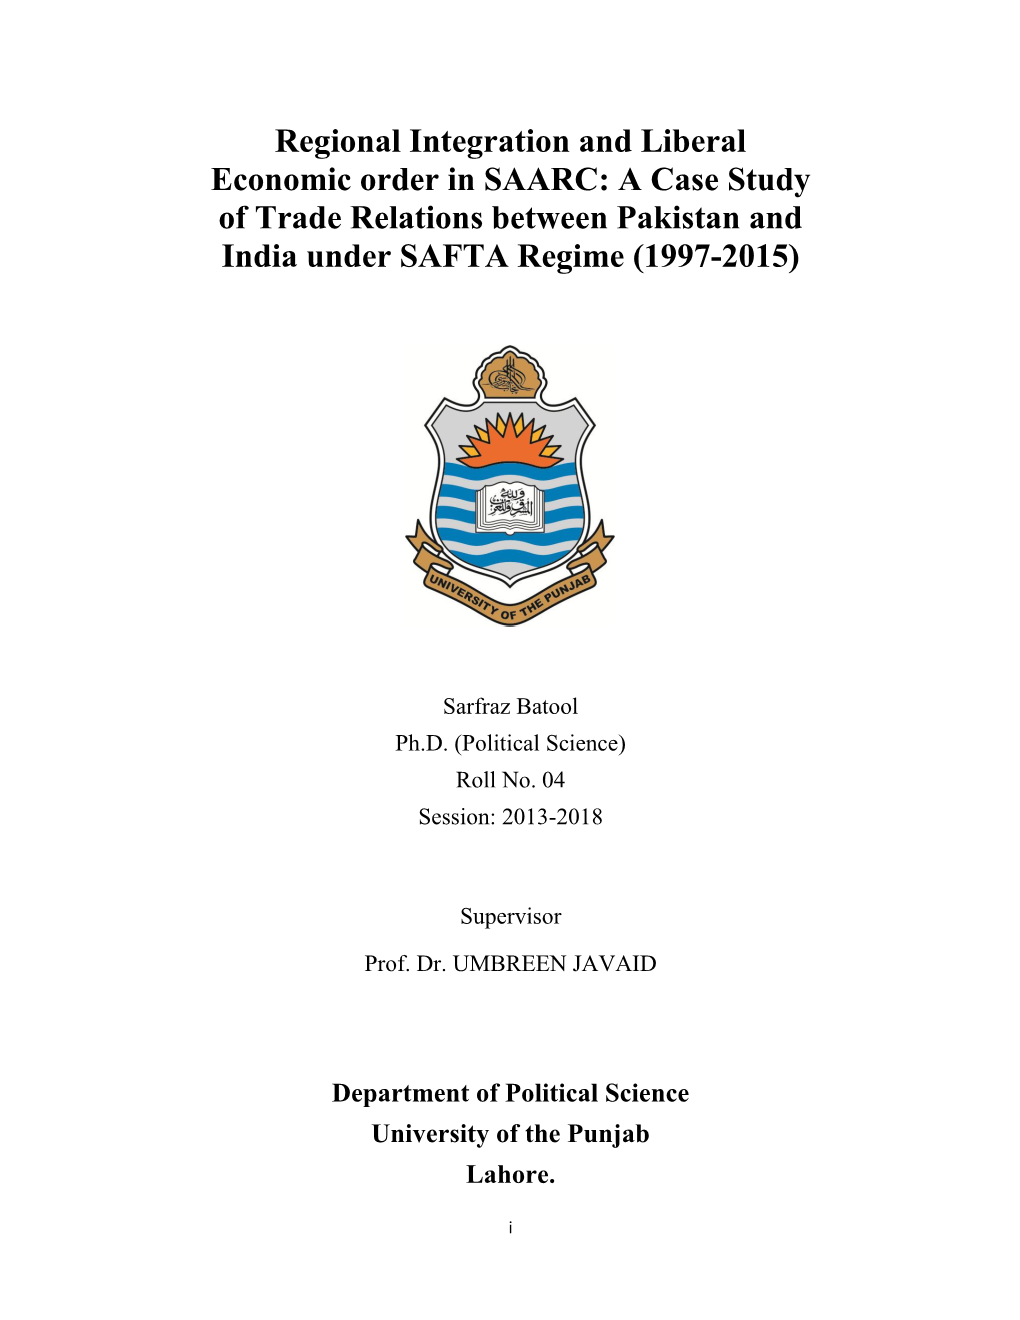 Regional Integration and Liberal Economic Order in SAARC: a Case Study of Trade Relations Between Pakistan and India Under SAFTA Regime (1997-2015)